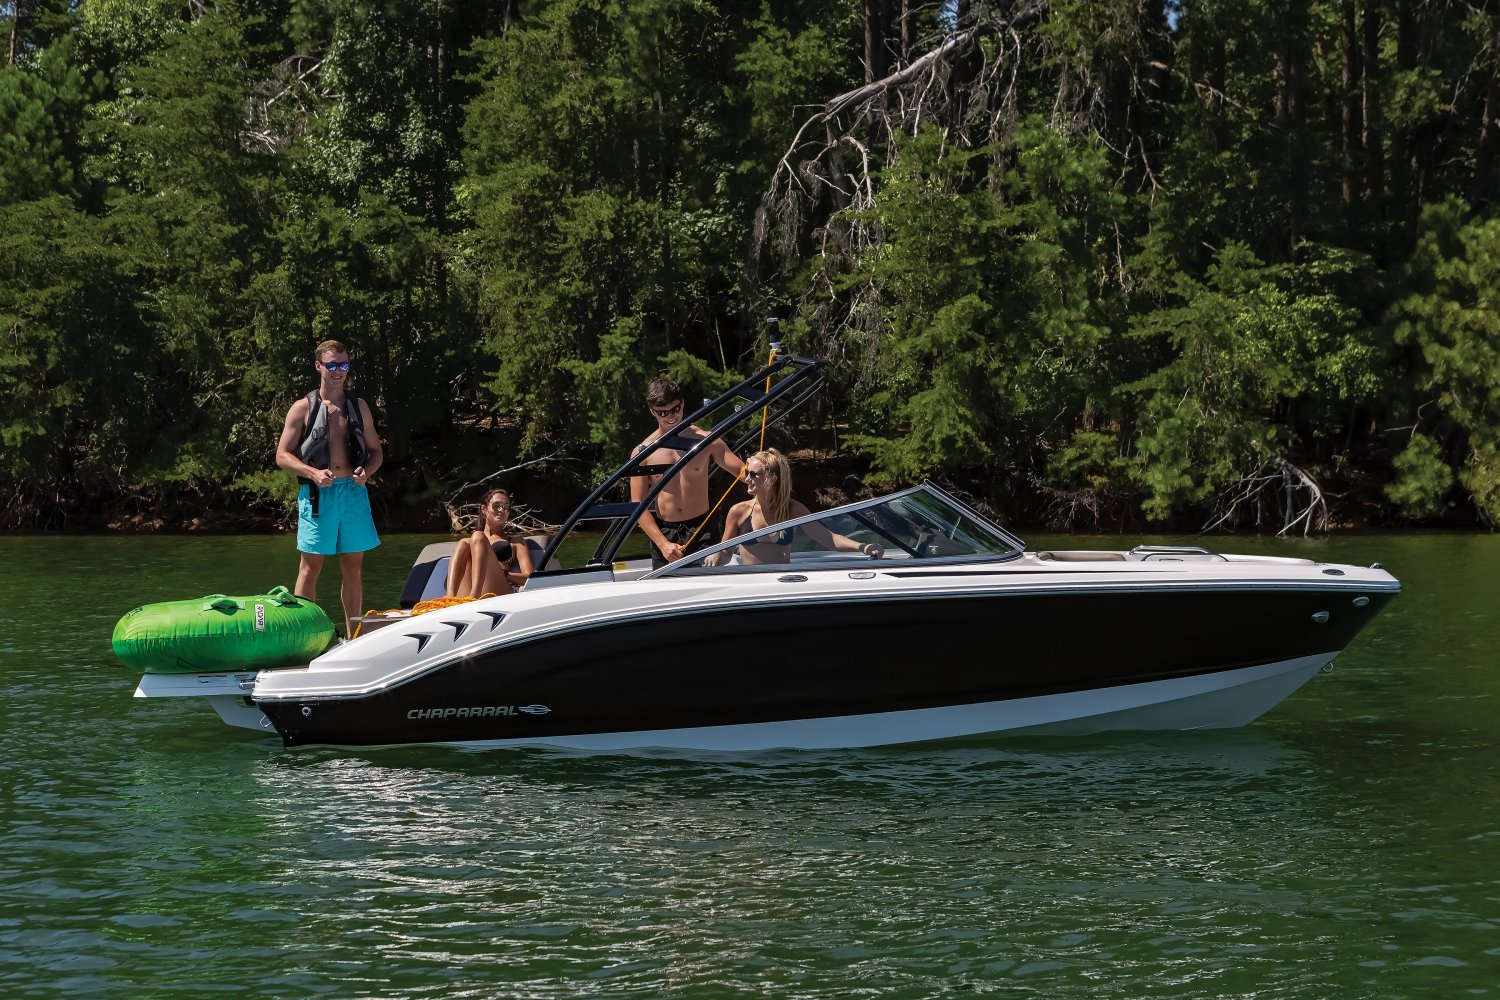 http://www.chaparralboats.com/images/inventoryImages/21s_20/1500px/SSi-21-Tubing-20.jpg